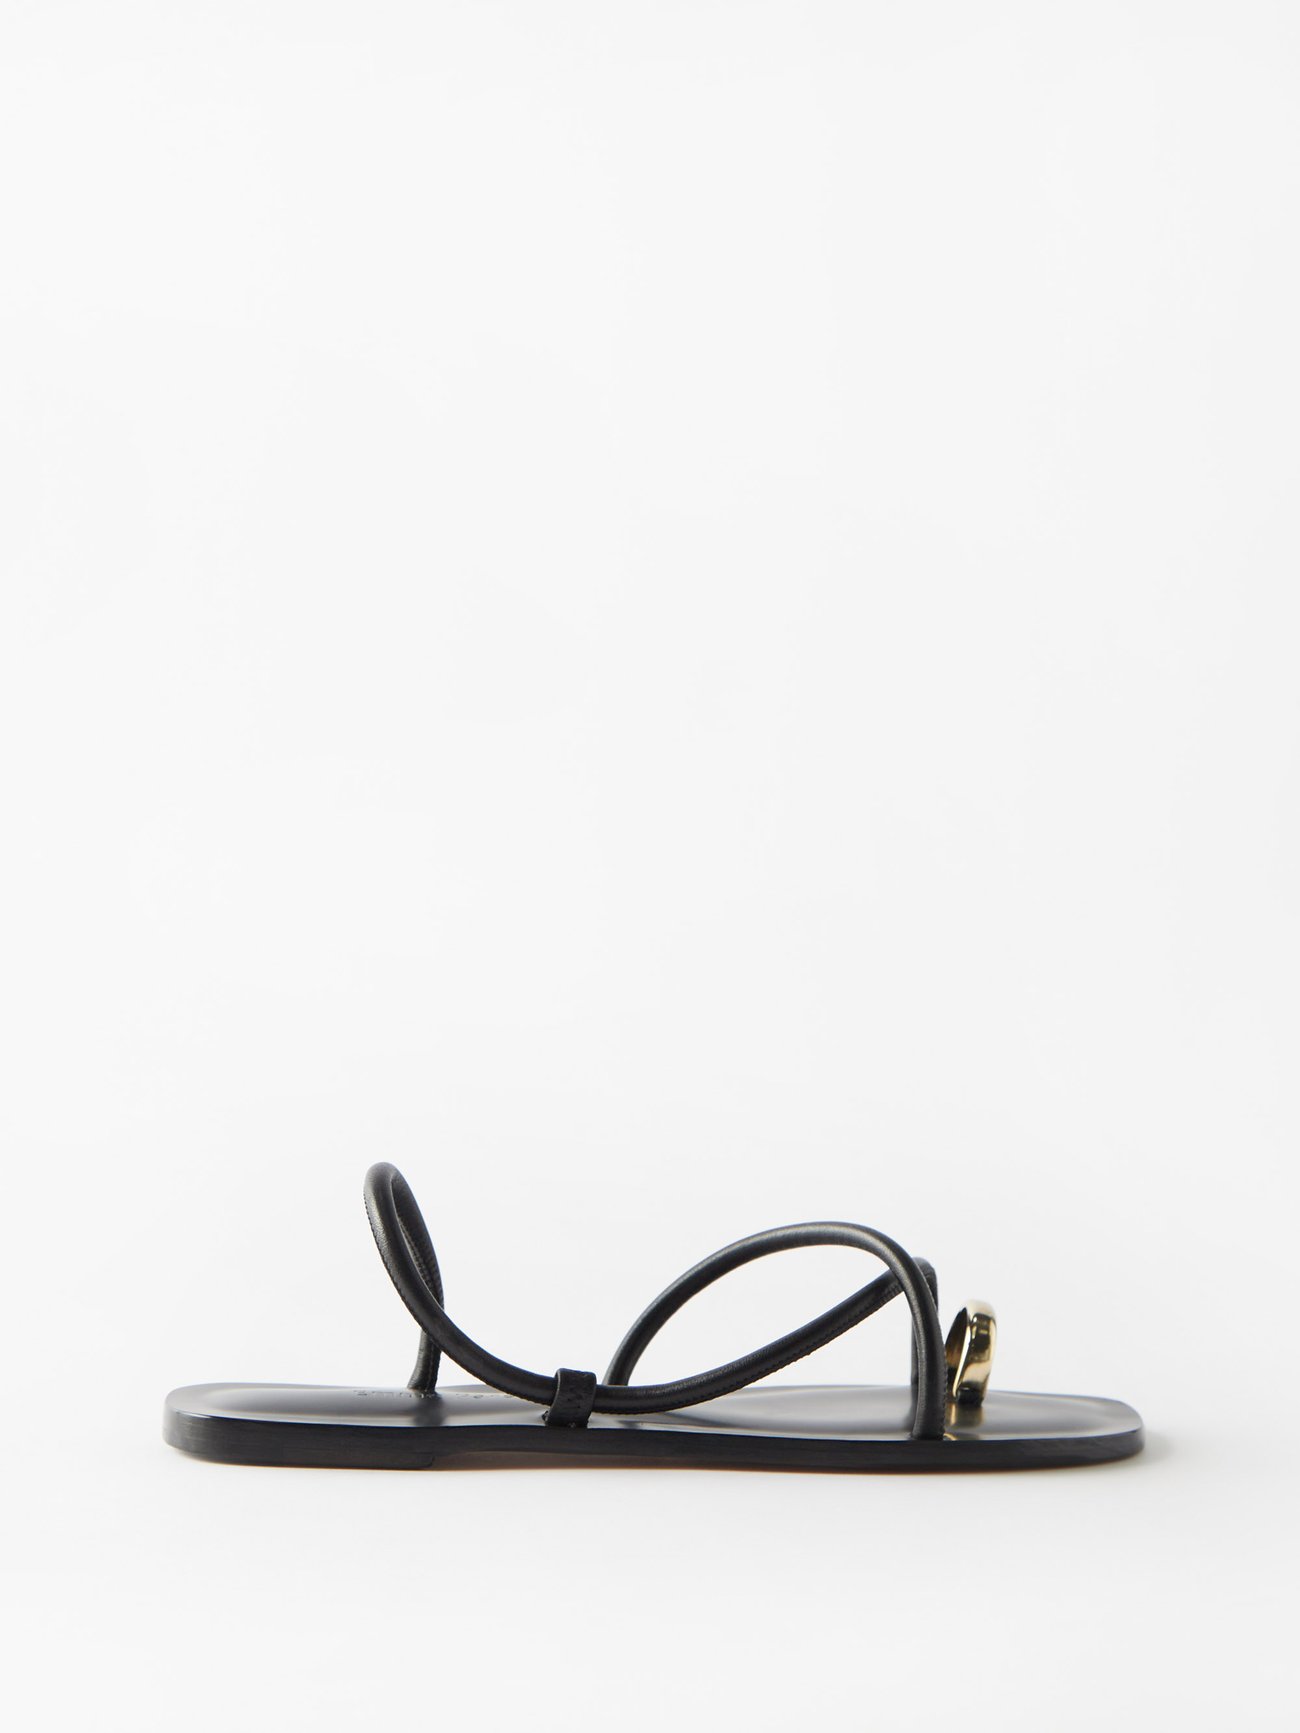 Emme Parsons' black Laurie sandals feature a striking gold toe-ring, a padded insole and thick leather straps designed to stretch over time, adapting to the wearer.